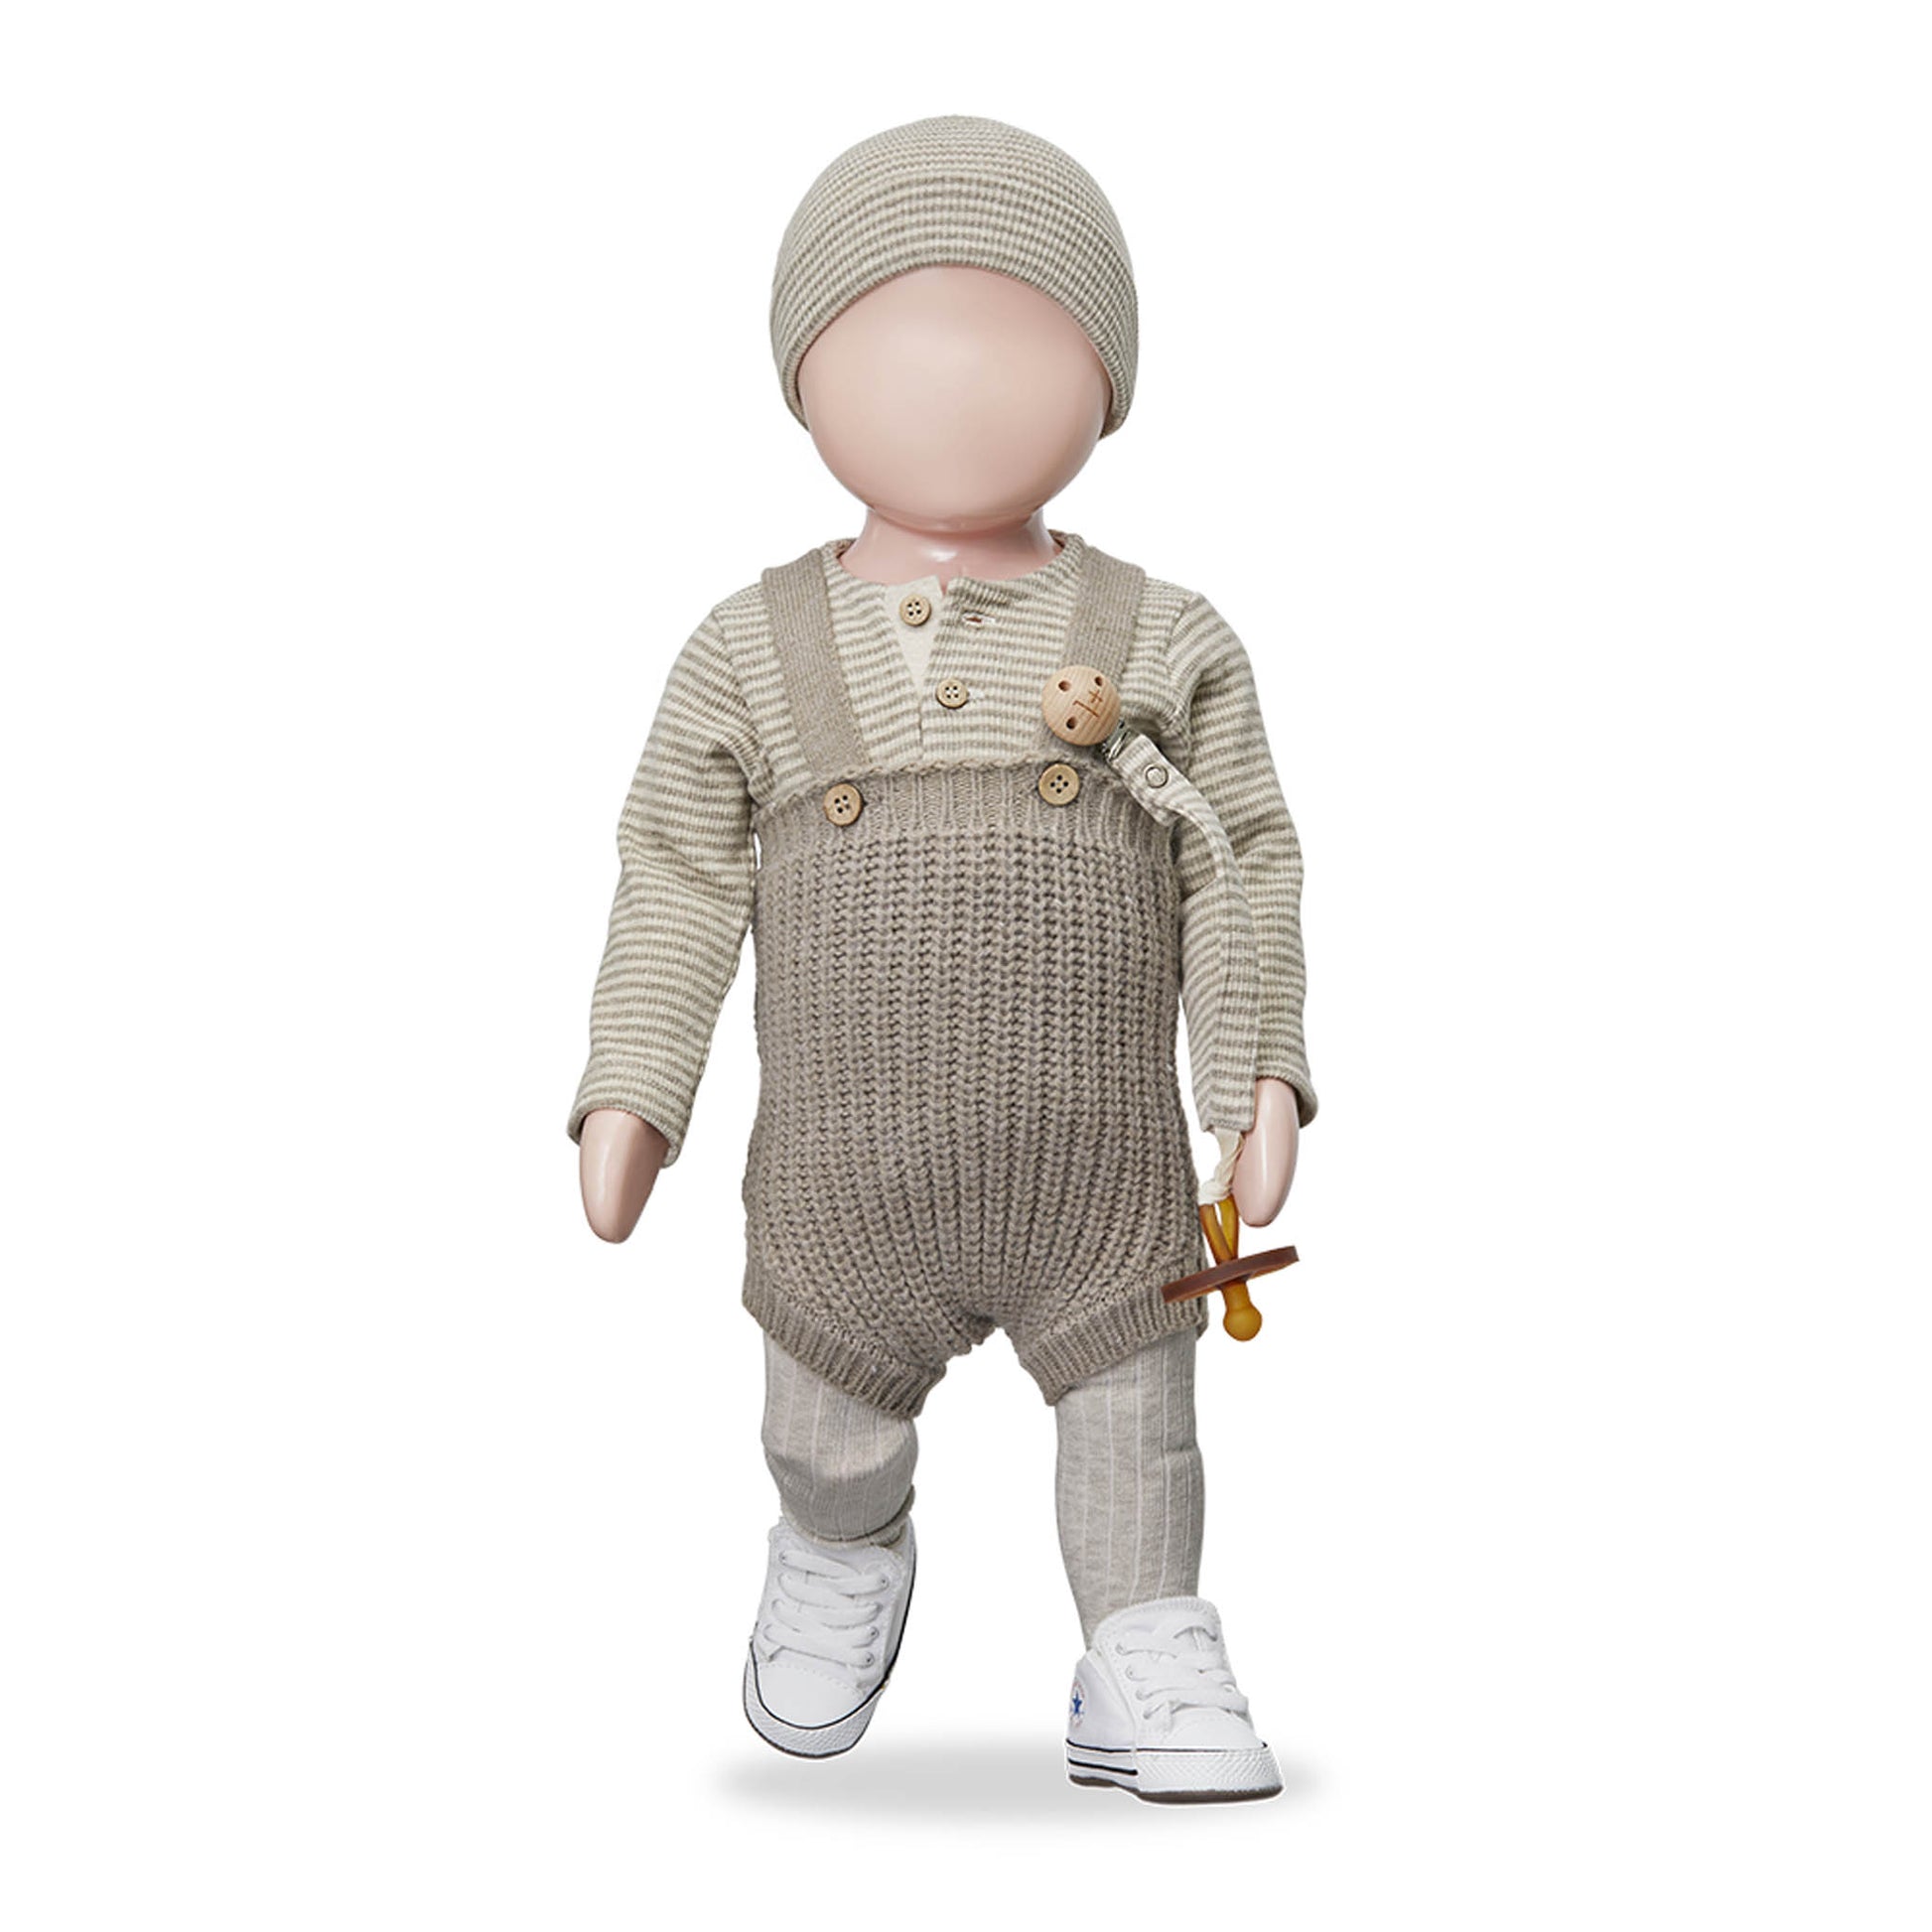 1 + in the Family - Strumpfhose "Sira" | oatmeal - Leja Concept Store